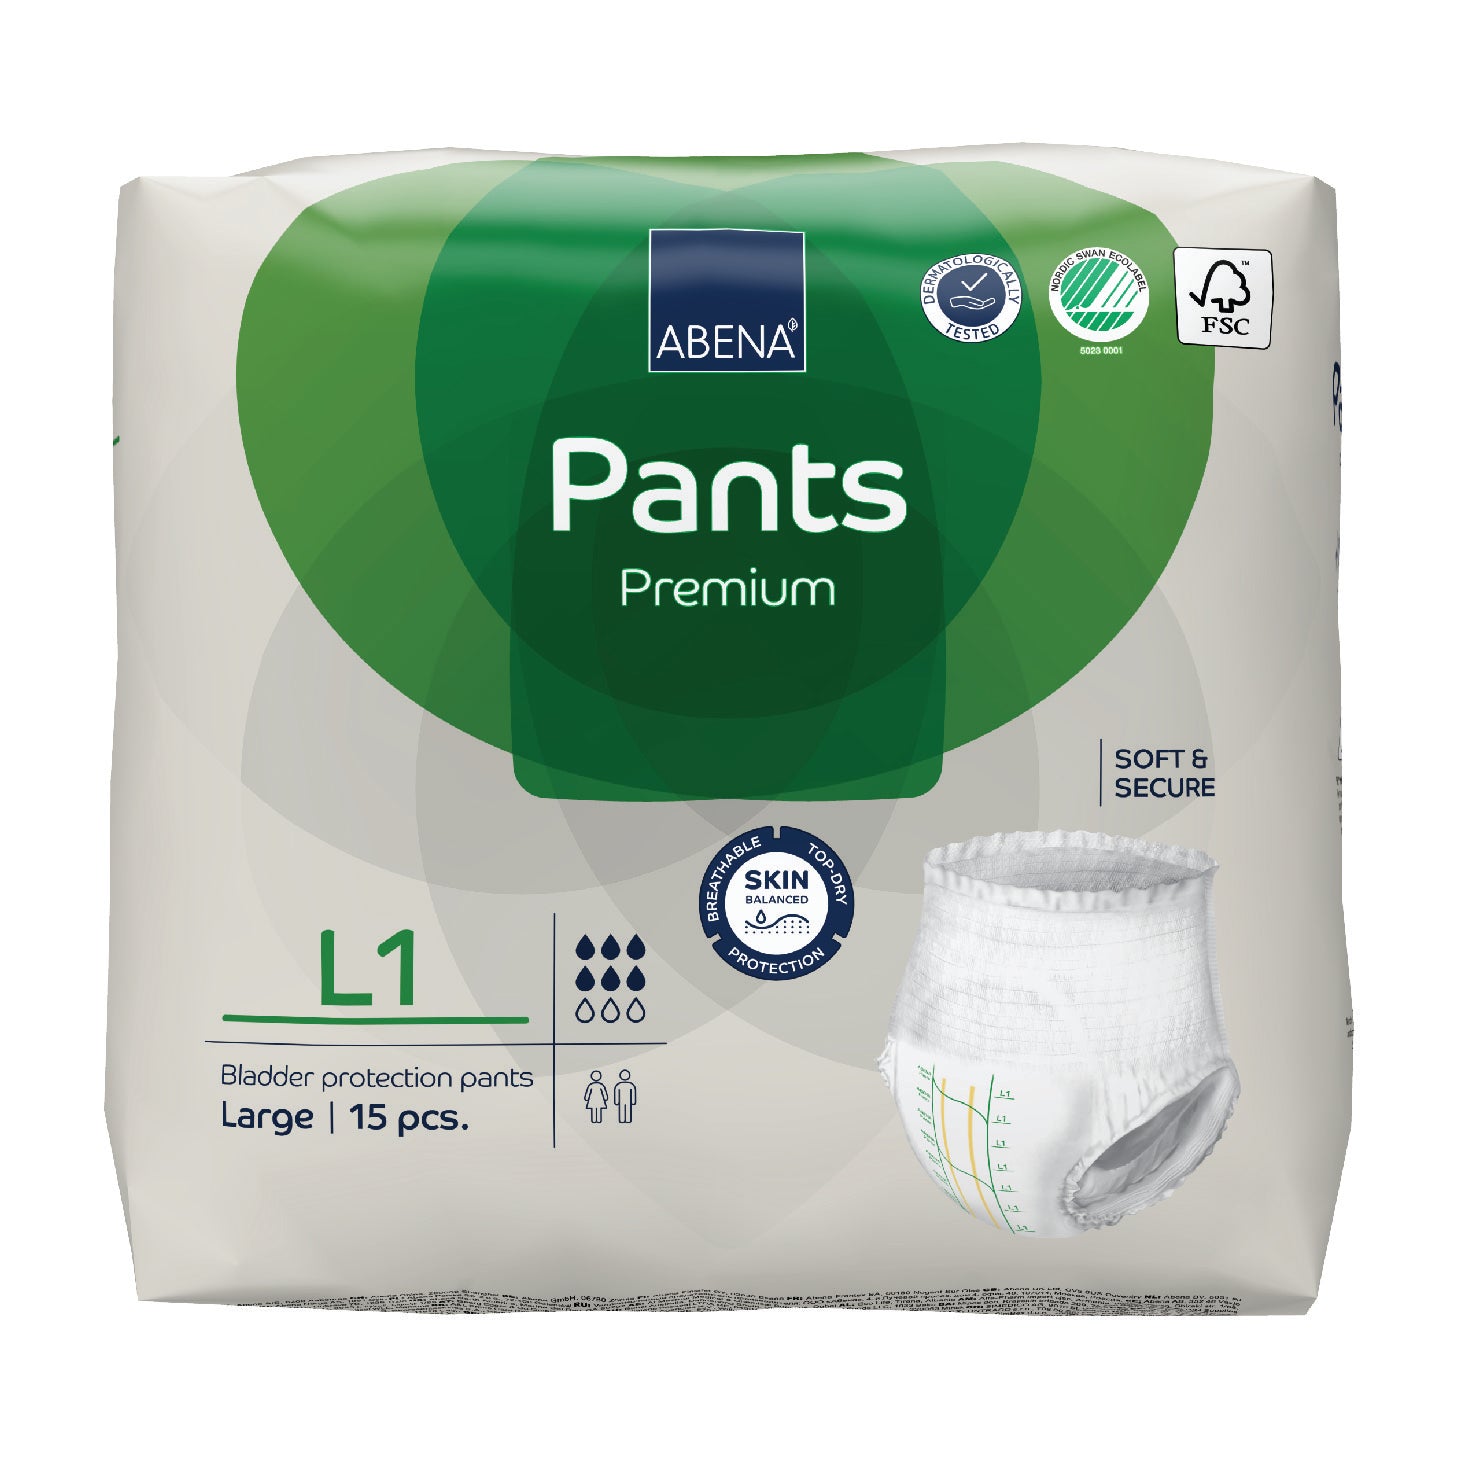  Refré Incontinence Pull-on Pants Maximum, Large, 16